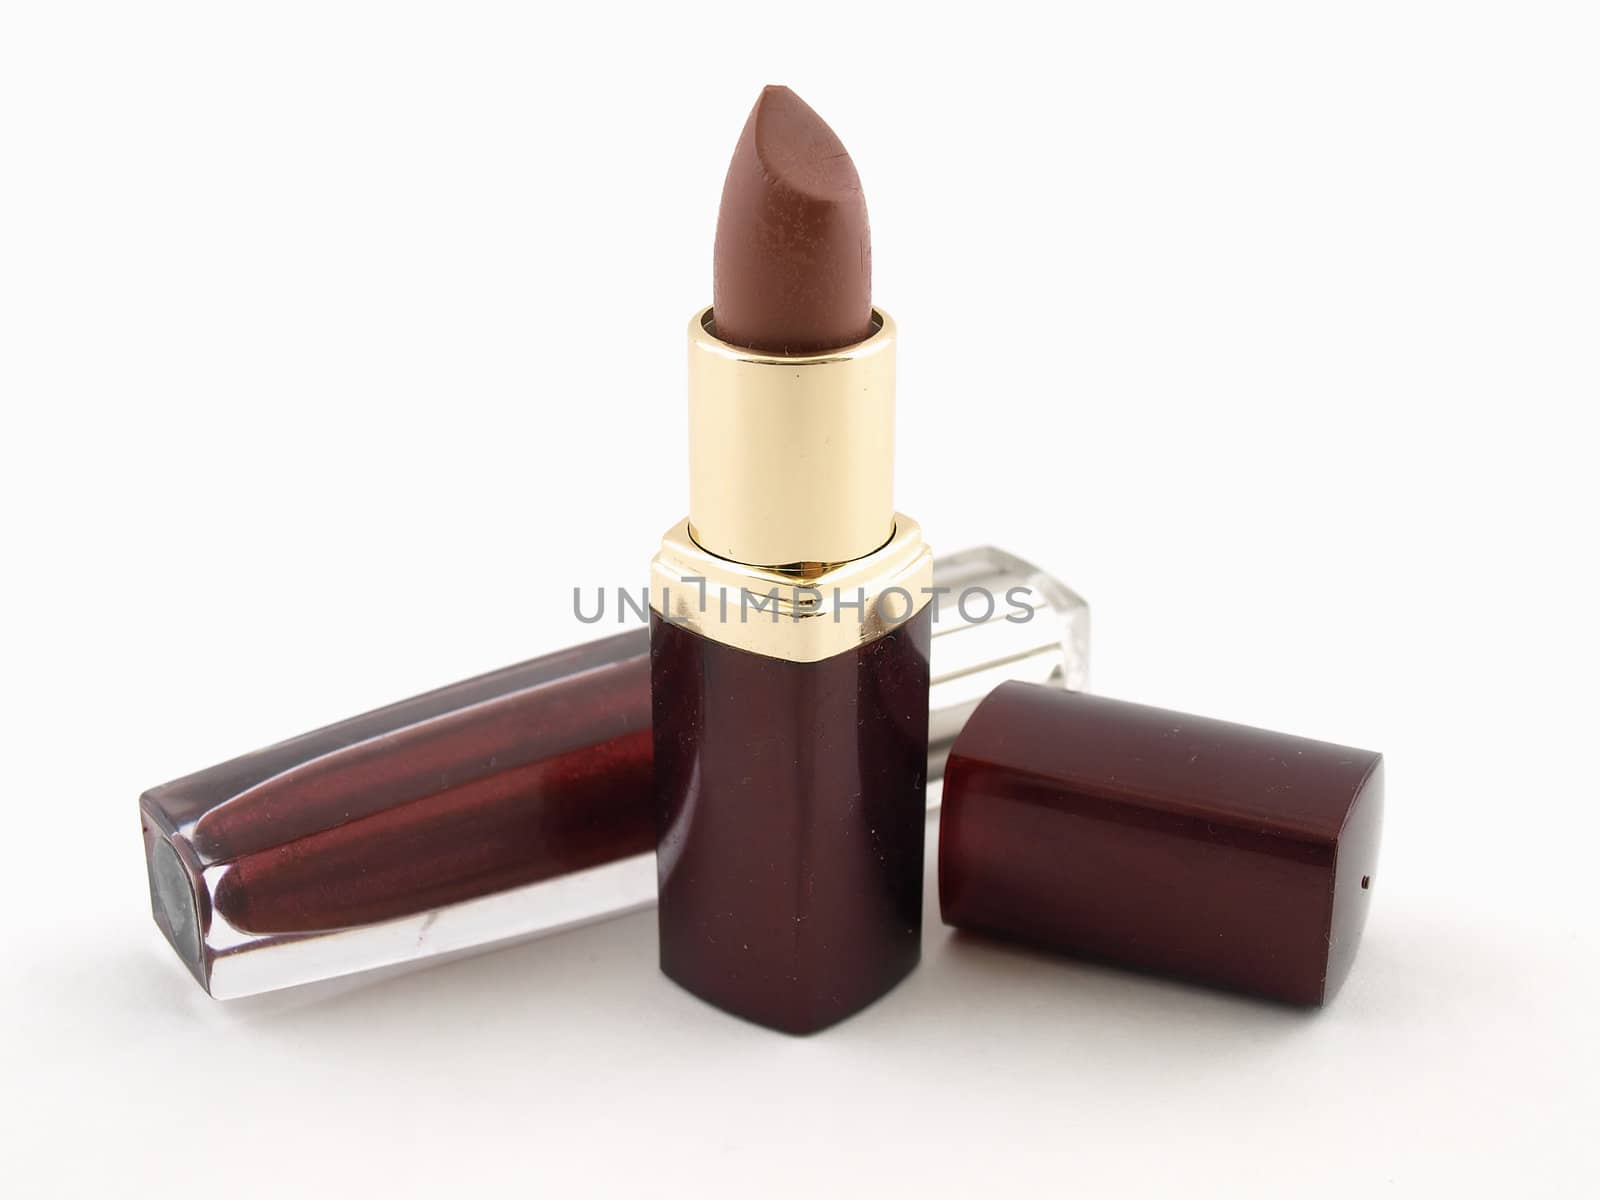 Two lipstick compacts, one with the lid off isolated on a white background